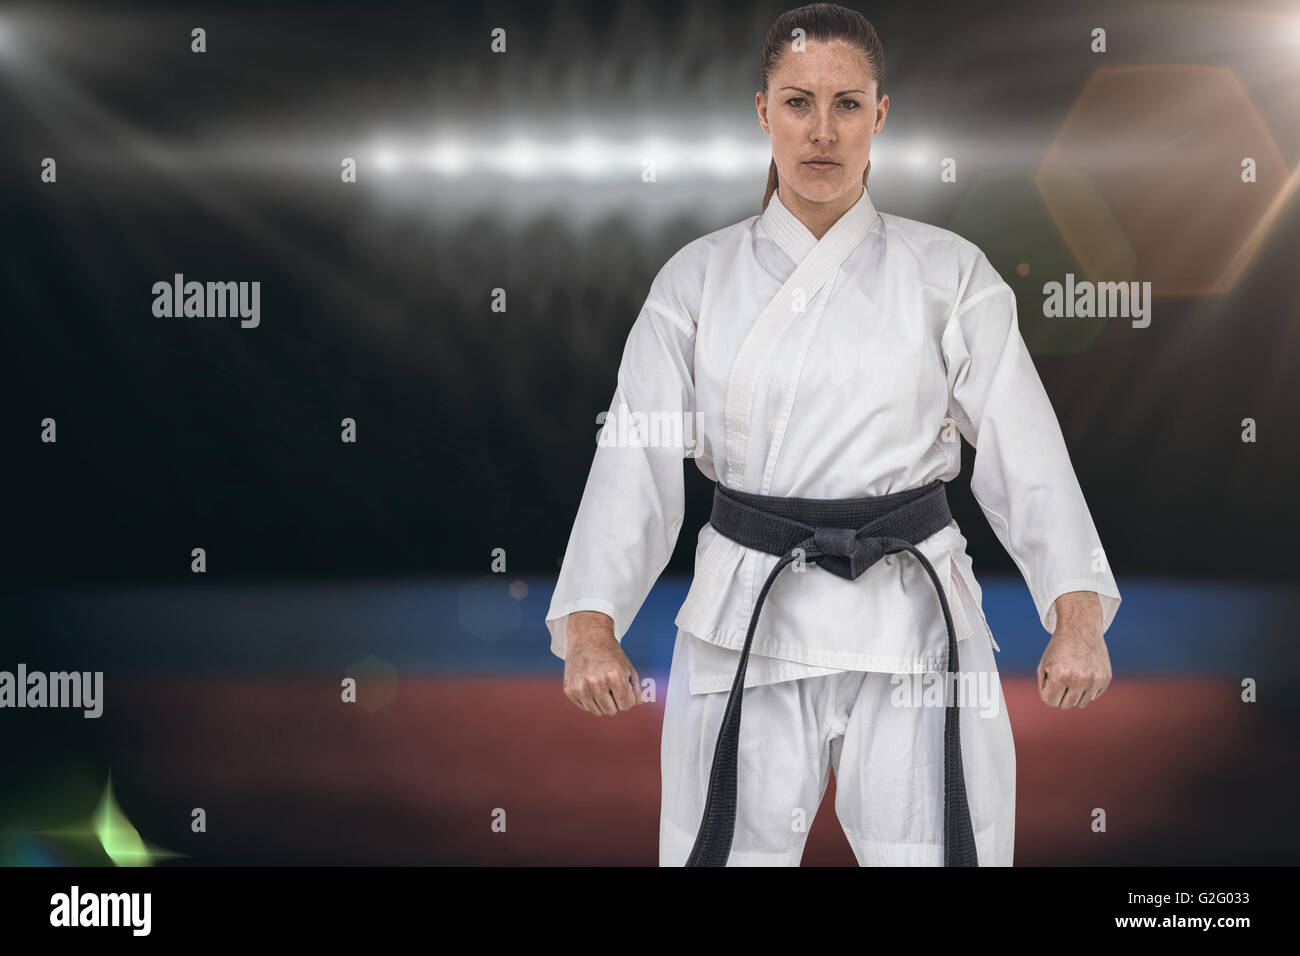 Composite image of female karate player posing on white background Stock Photo